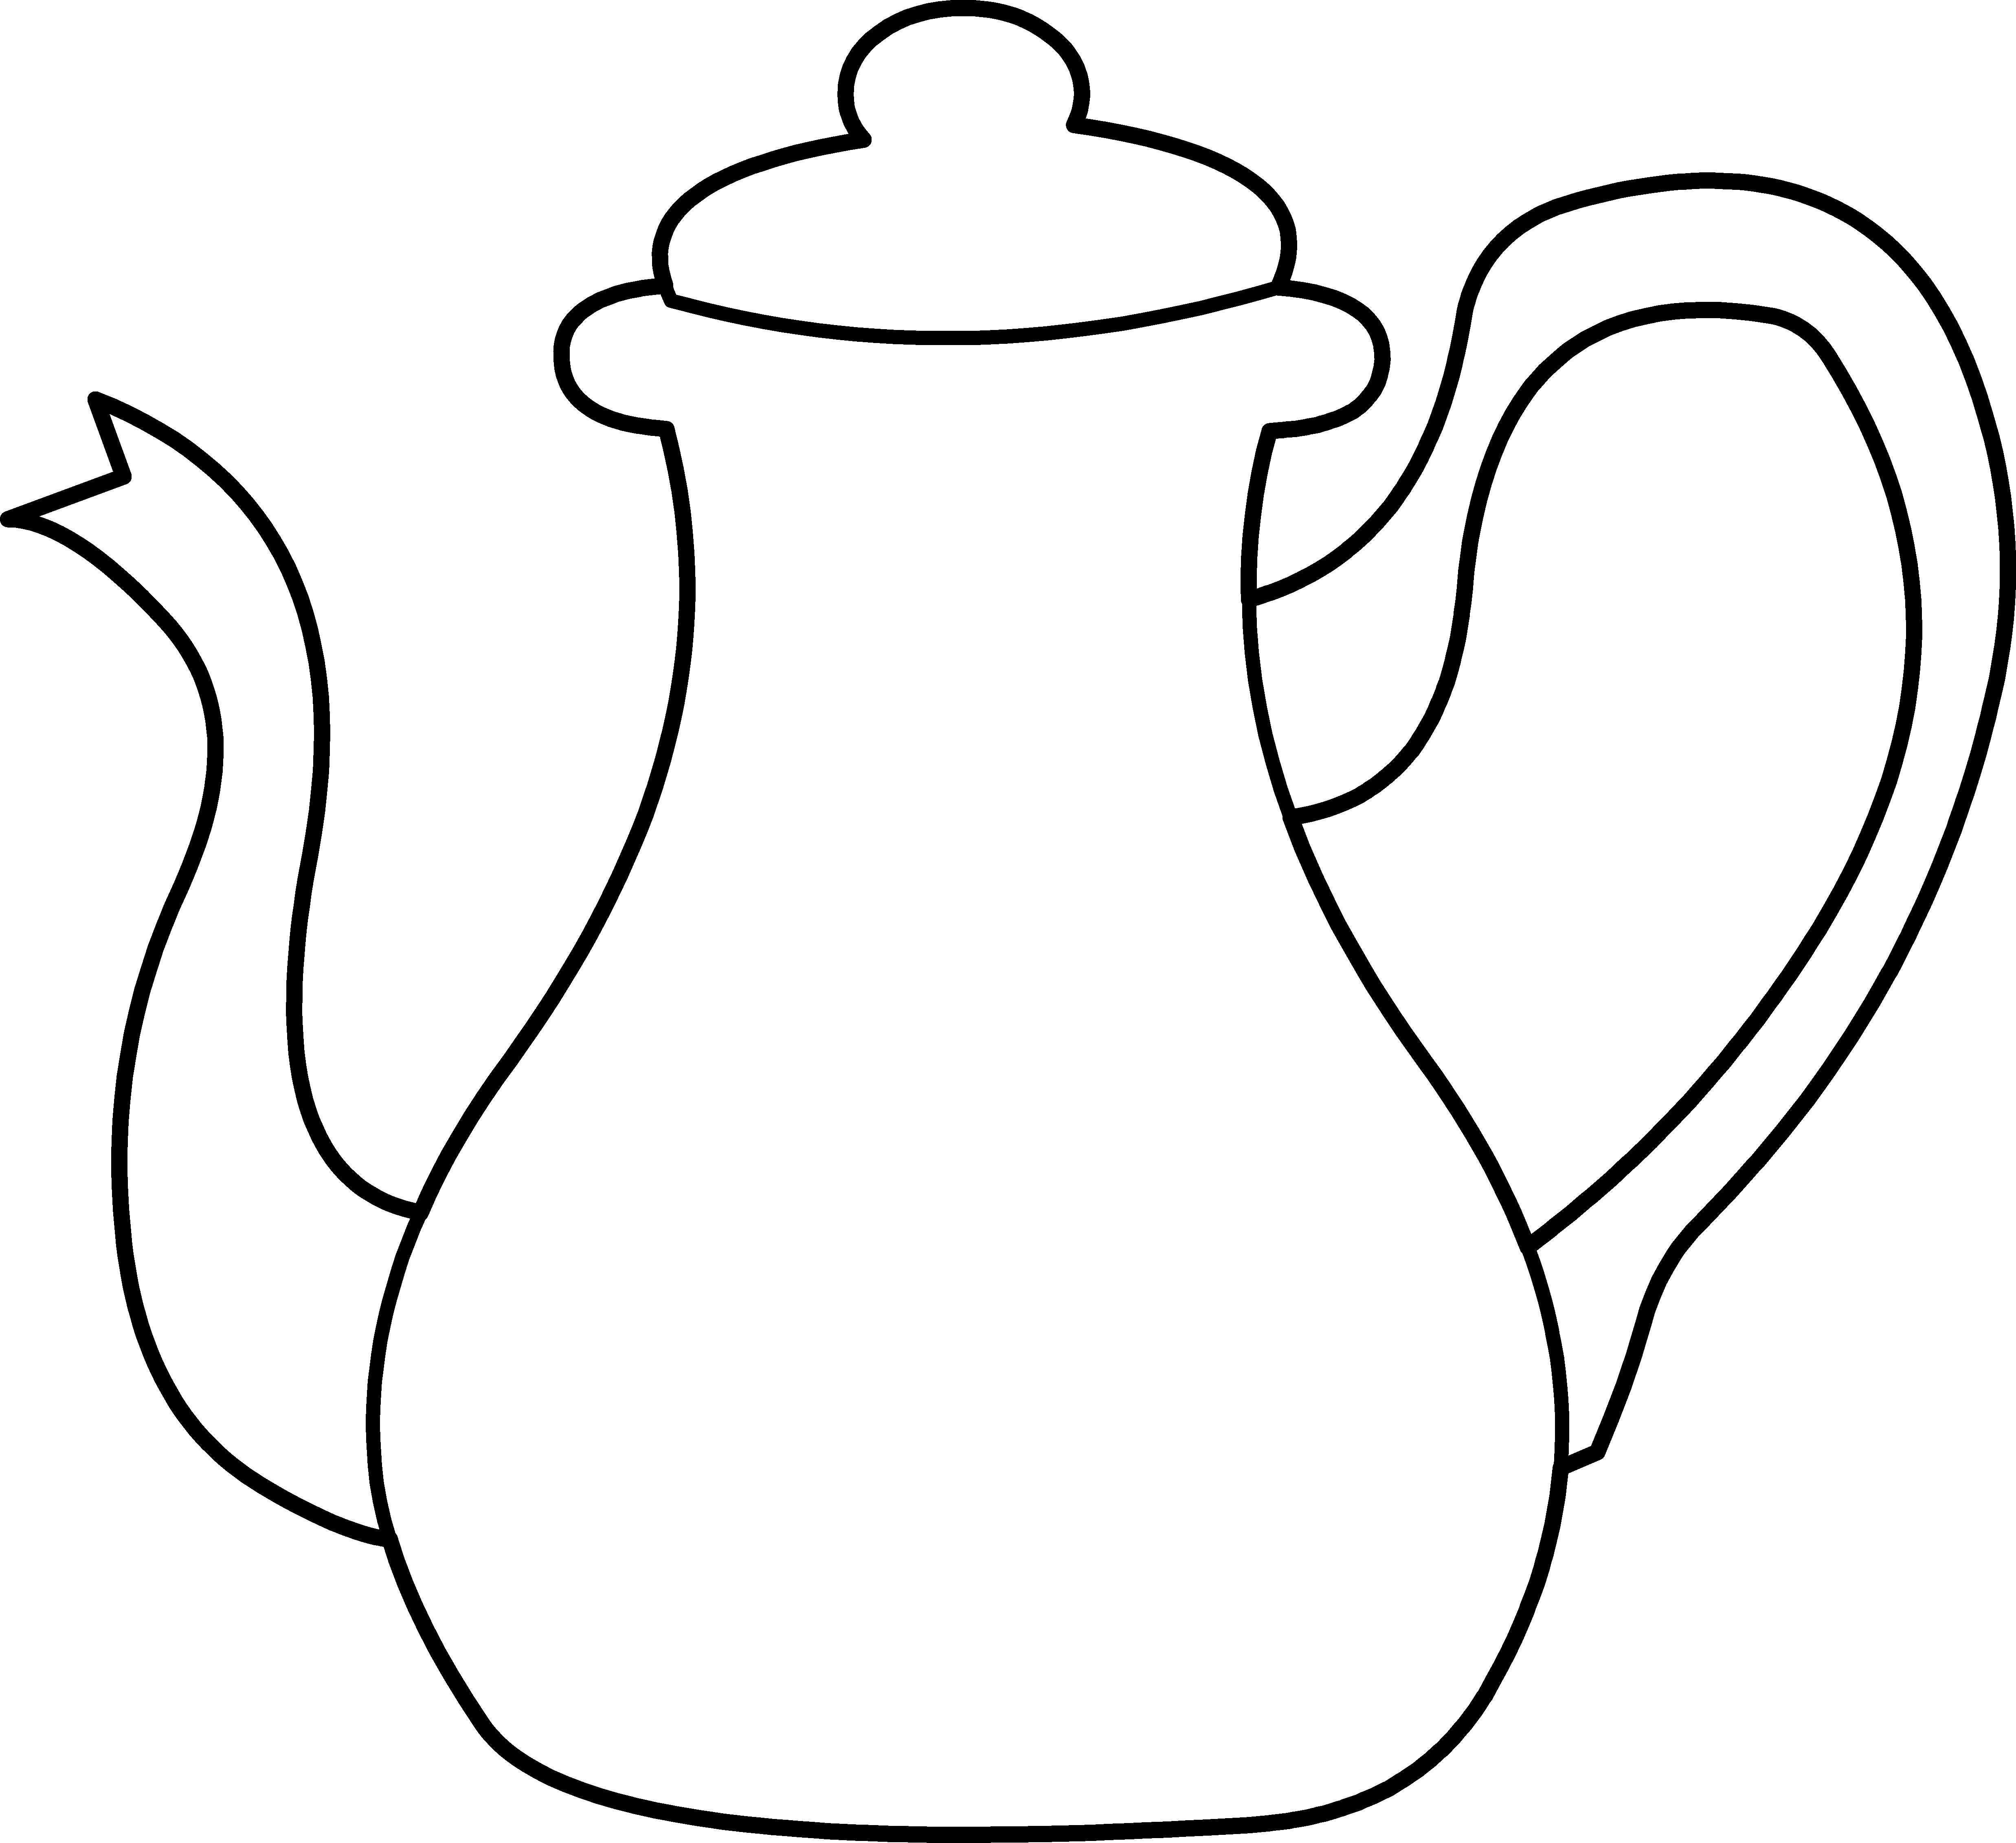 Teacup Clipart Black And White | Clipart Panda - Free Clipart Images